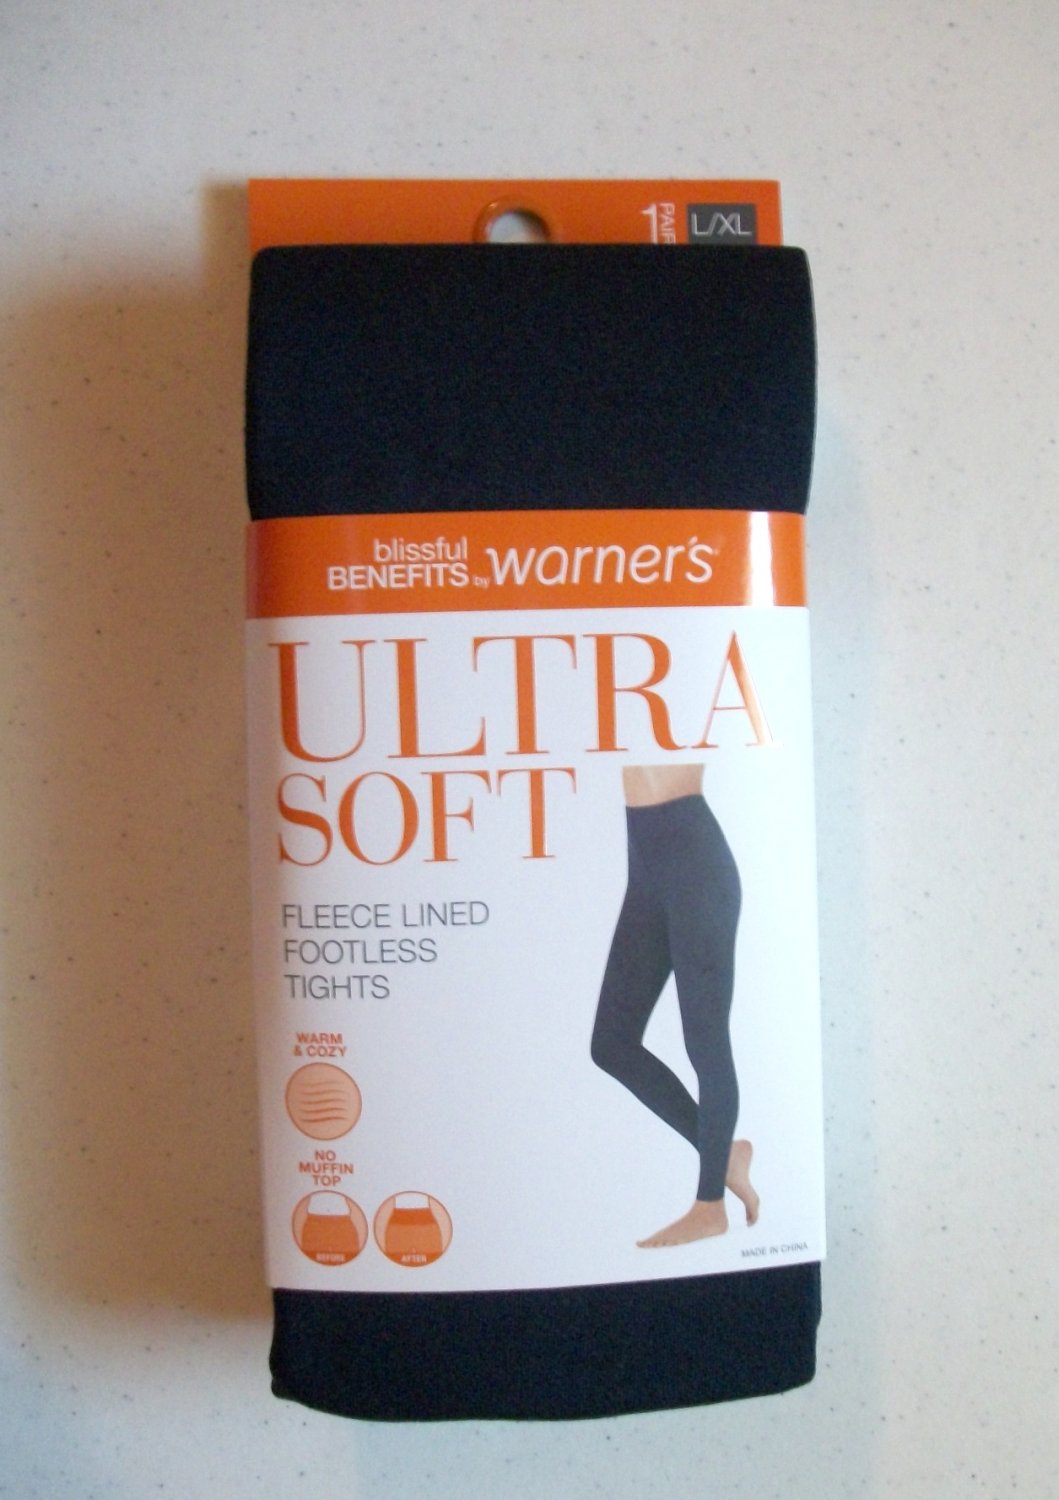 Warner's No Muffin Top Footless Fleece Lined Tights Size L/XL Dark Blue